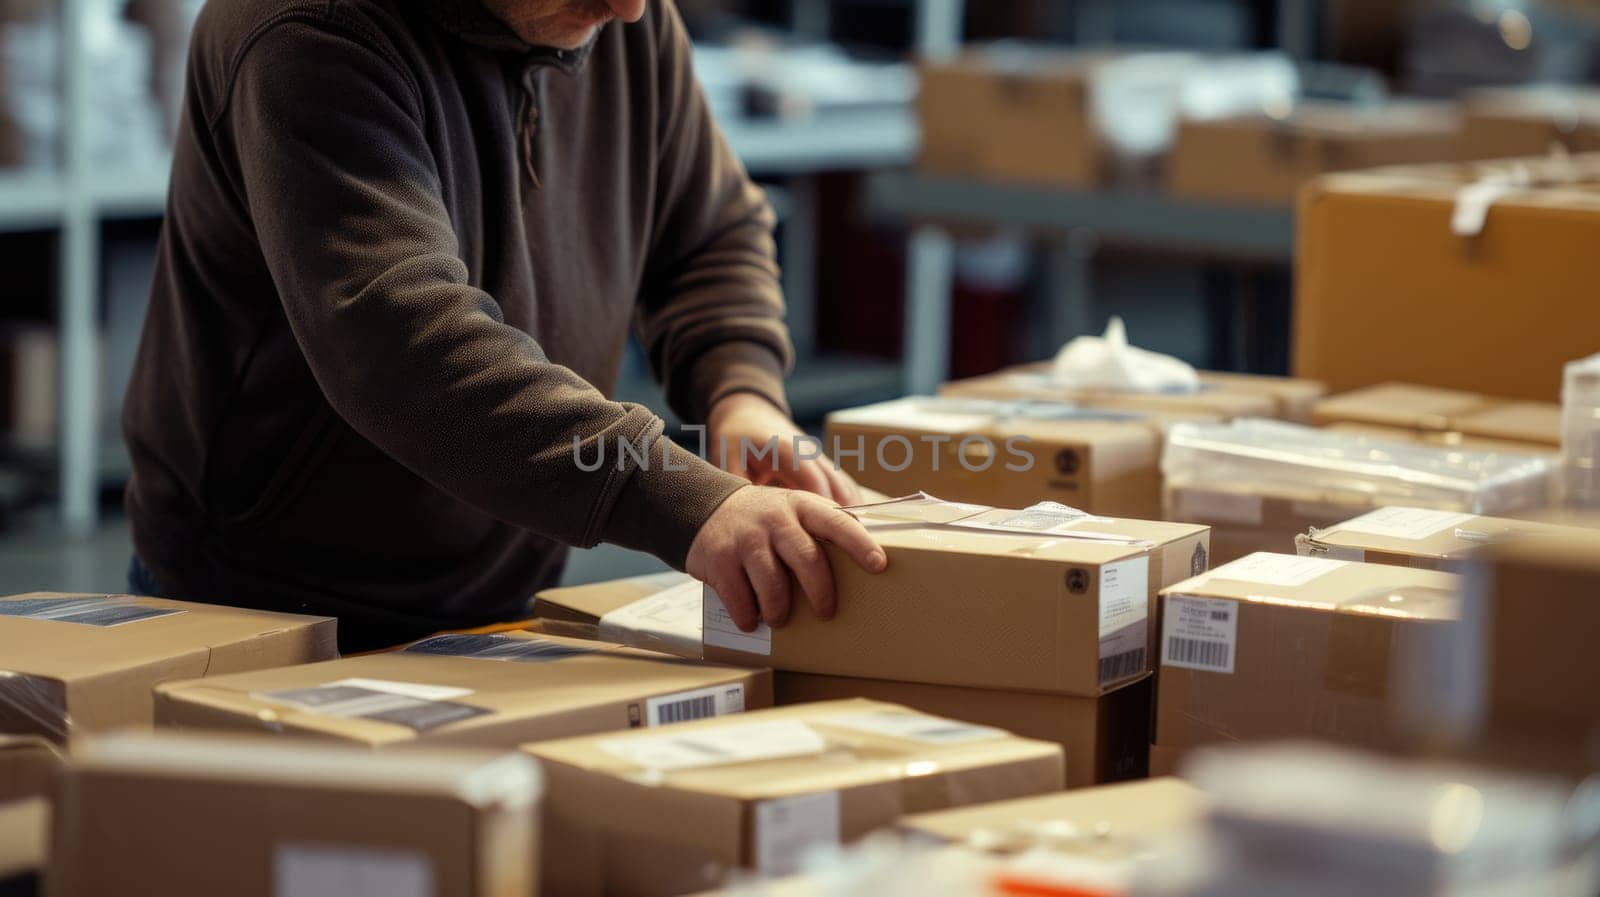 A man is packing hardwood boxes in a warehouse for an event publication. He carefully stacks the wood, making sure each box is solid. AIG41